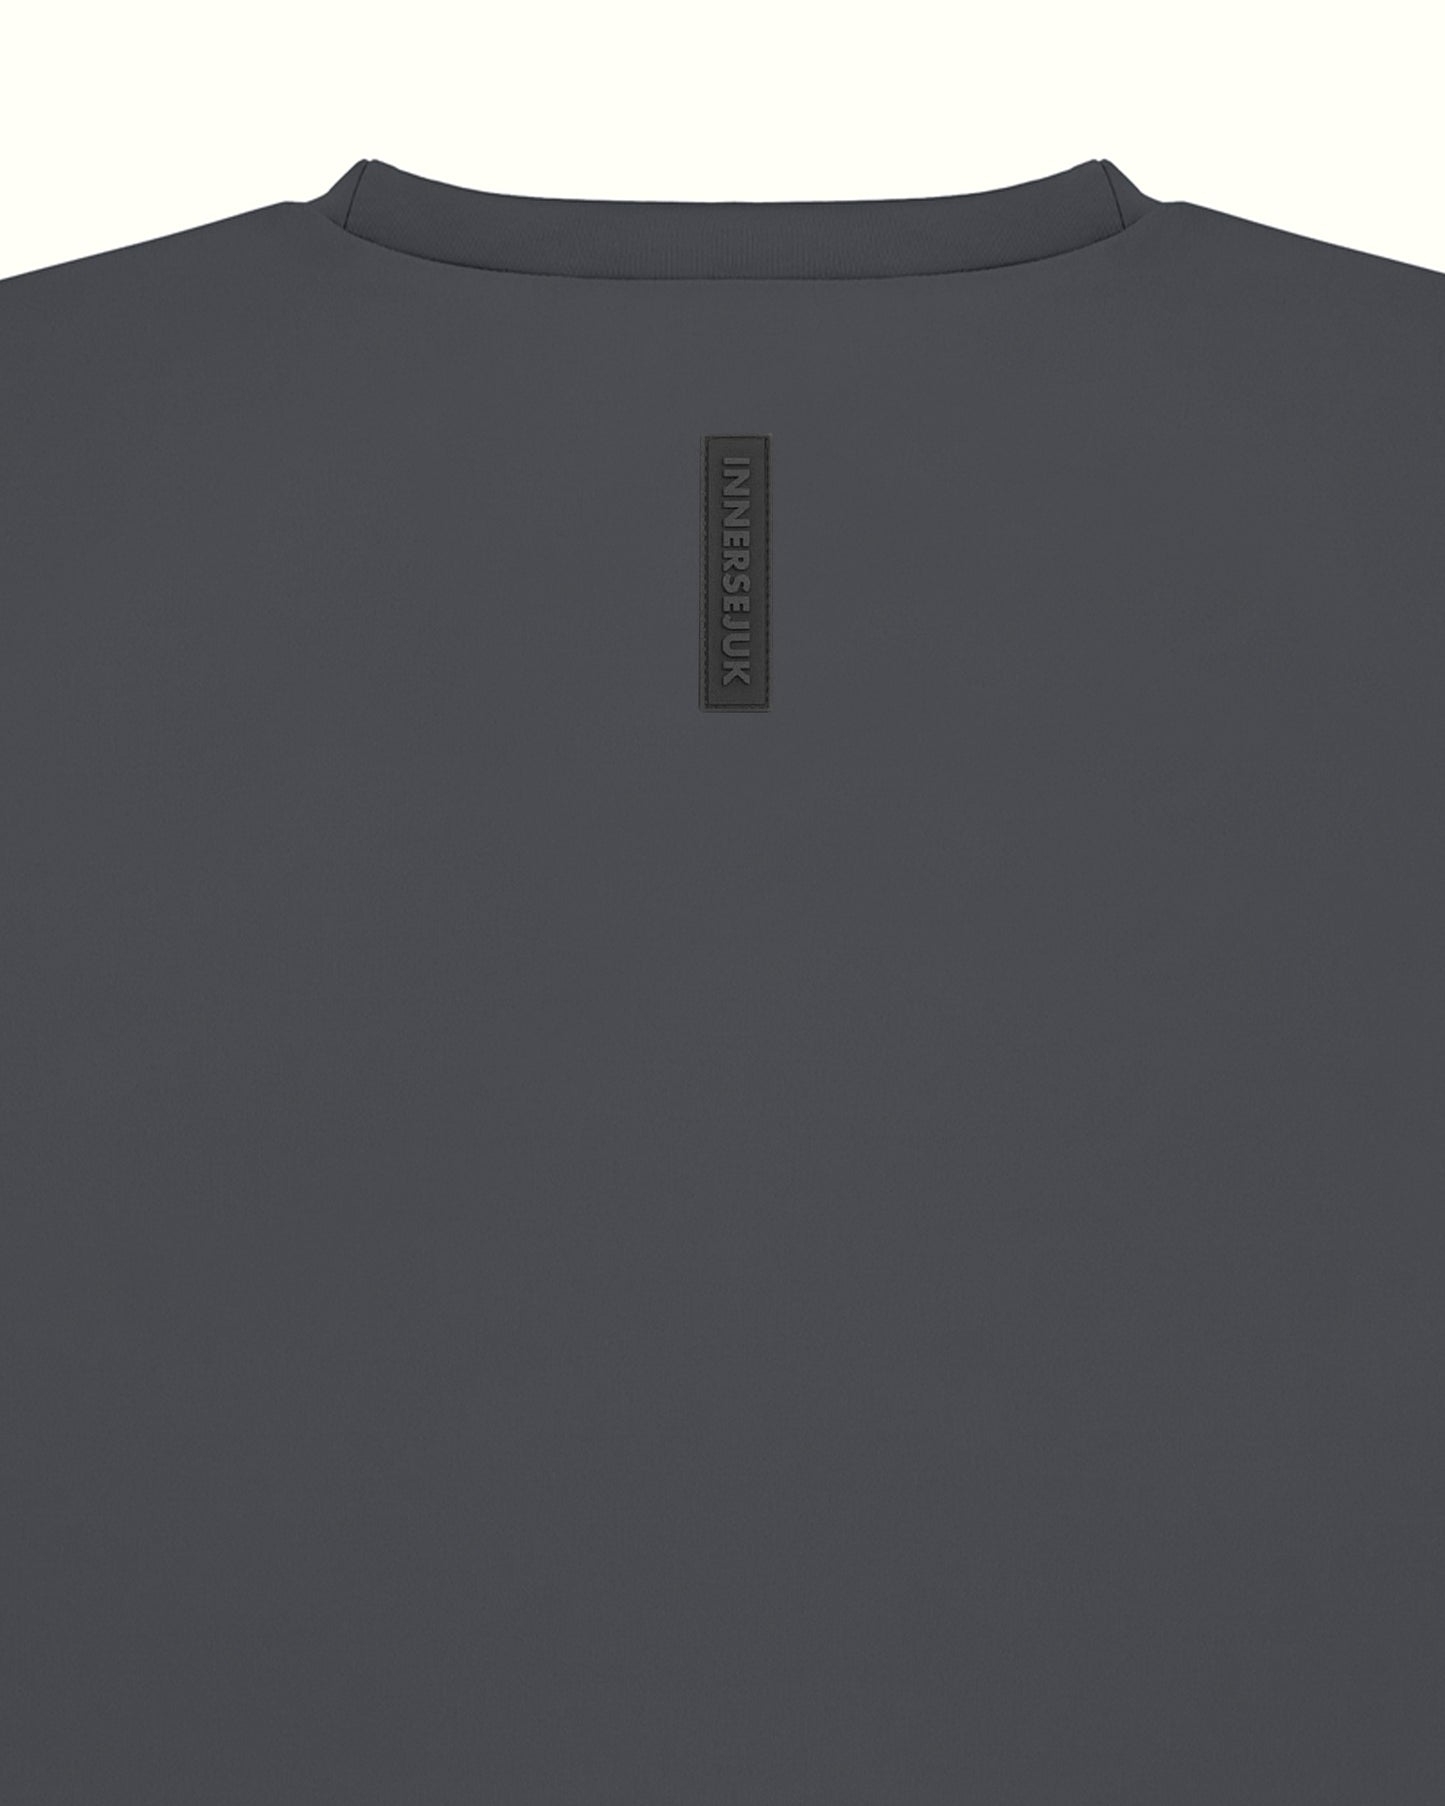 THE MIRROR IMAGE RELAXED TEE IN DARK GREY